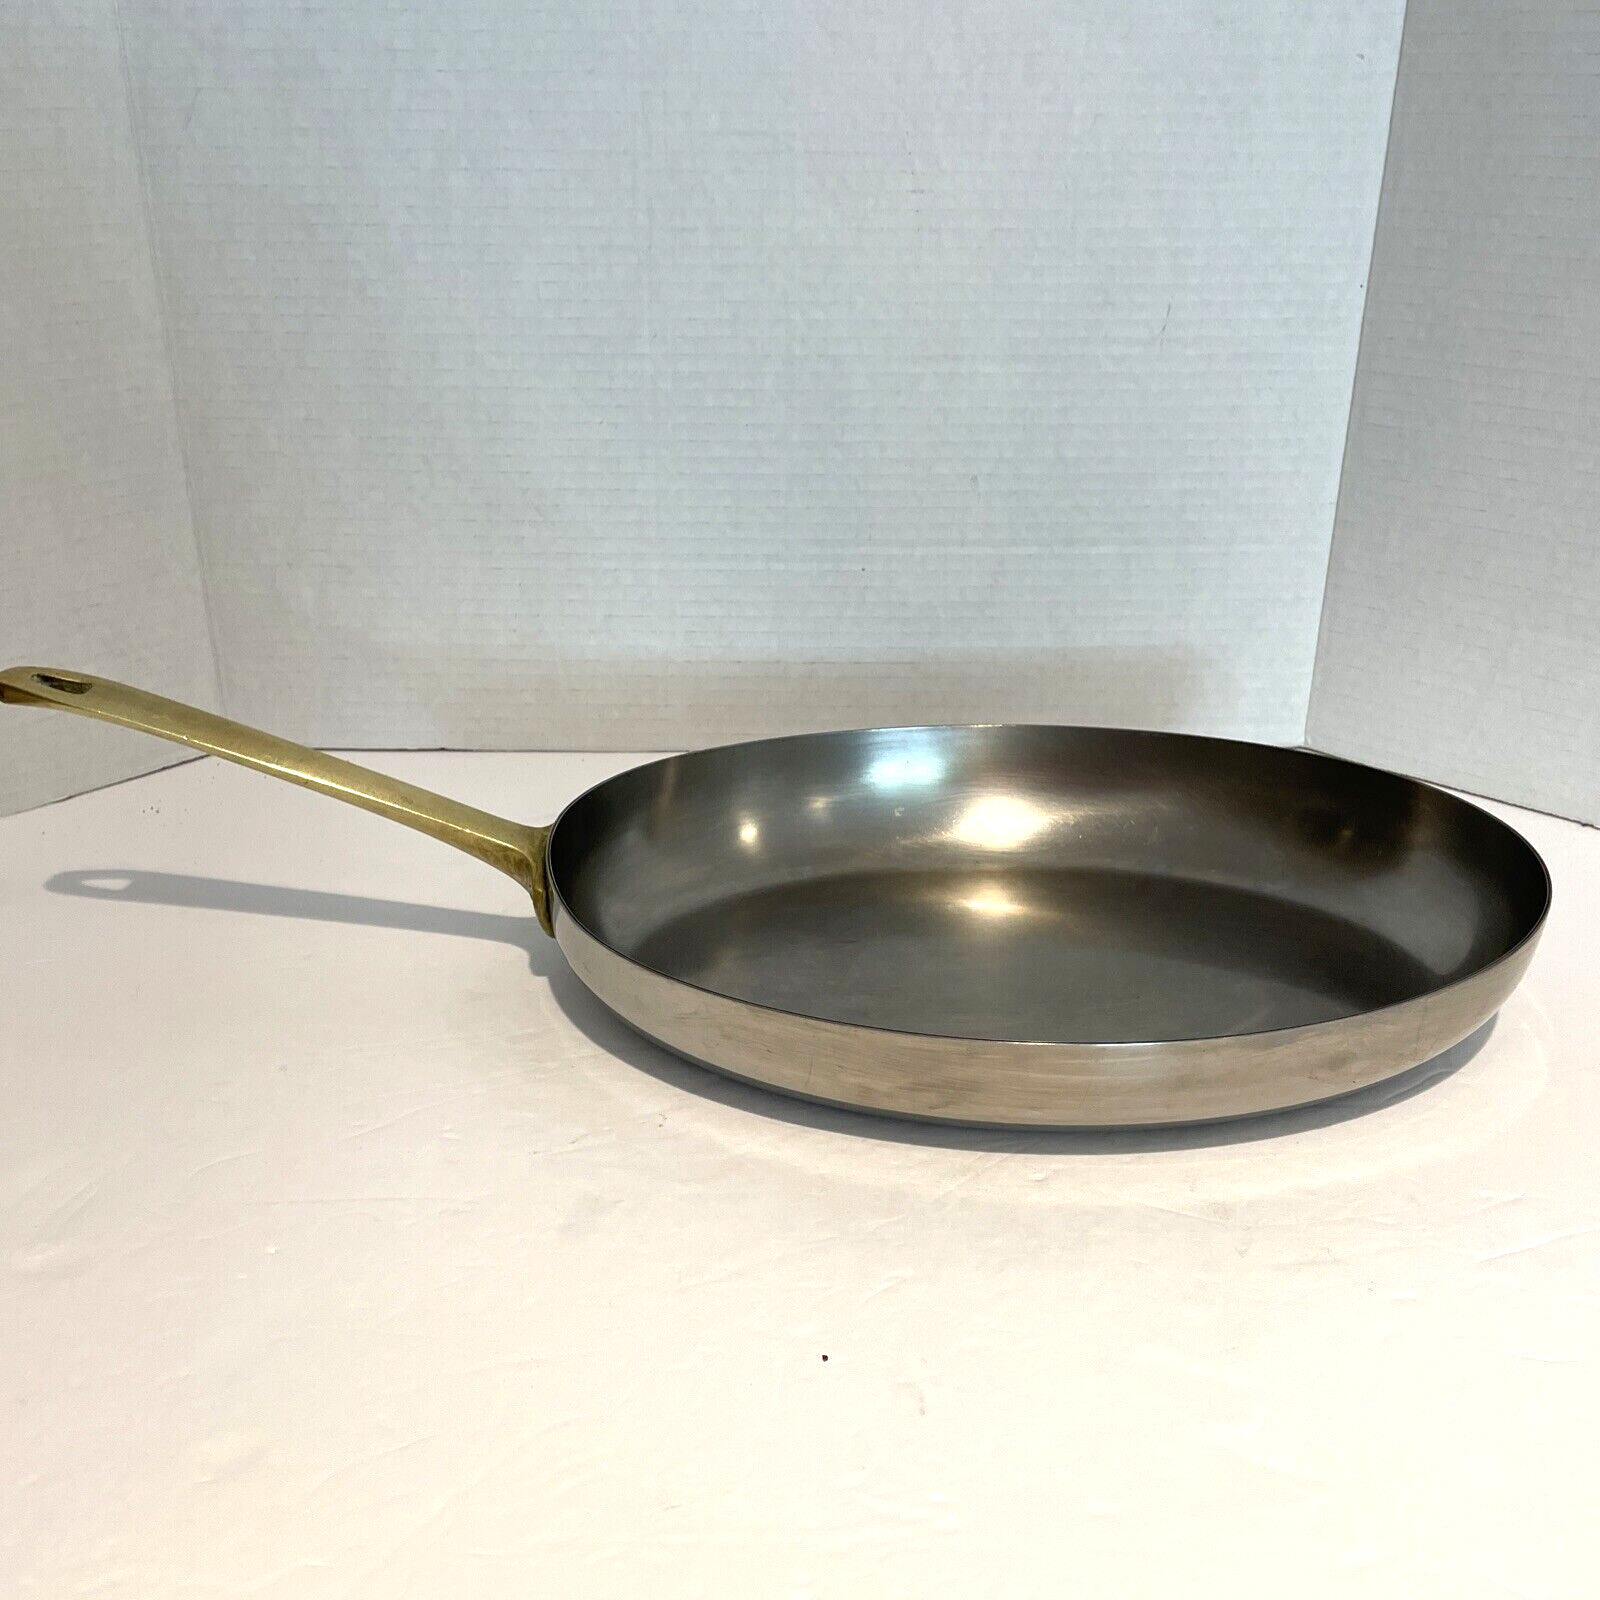 VTG PAUL REVERE WARE SIGNATURE STAINLESS 1801 OVAL FISH SKILLET PAN BRASS HANDLE